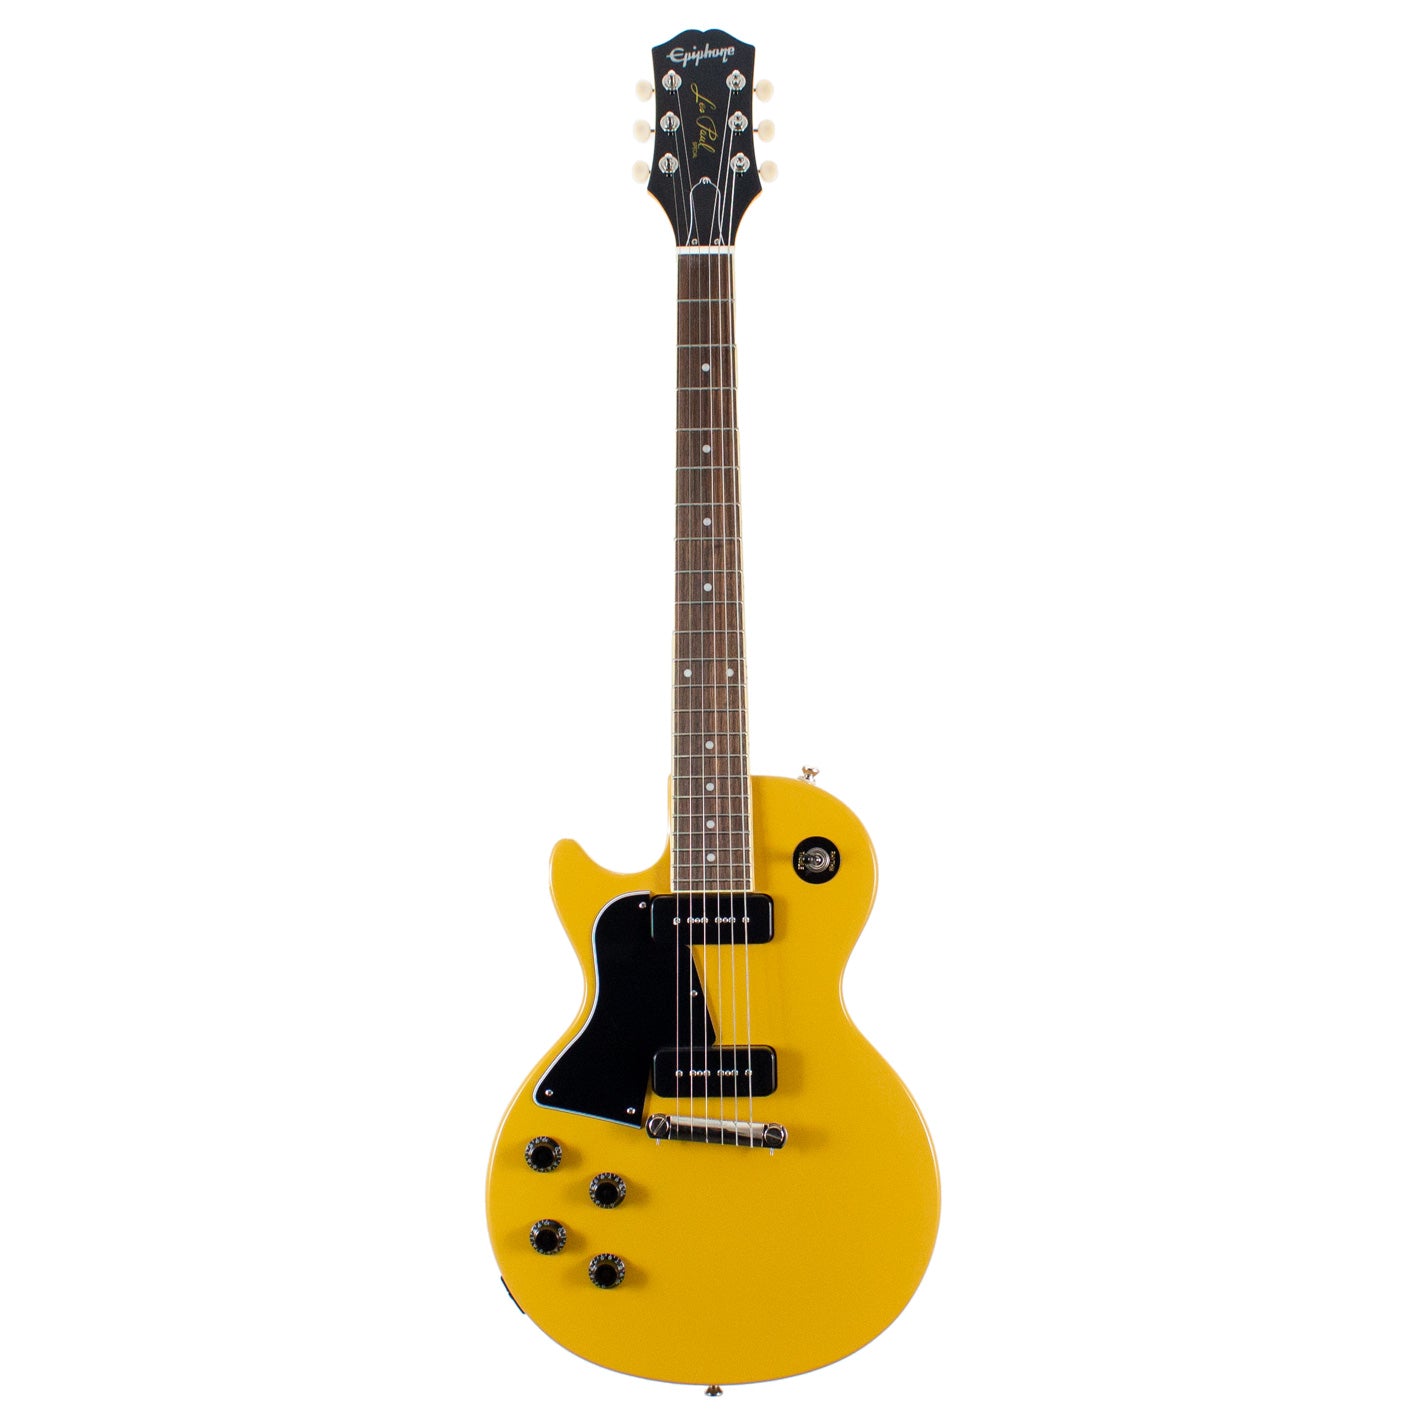 Epiphone Les Paul Special TV Yellow Left Handed